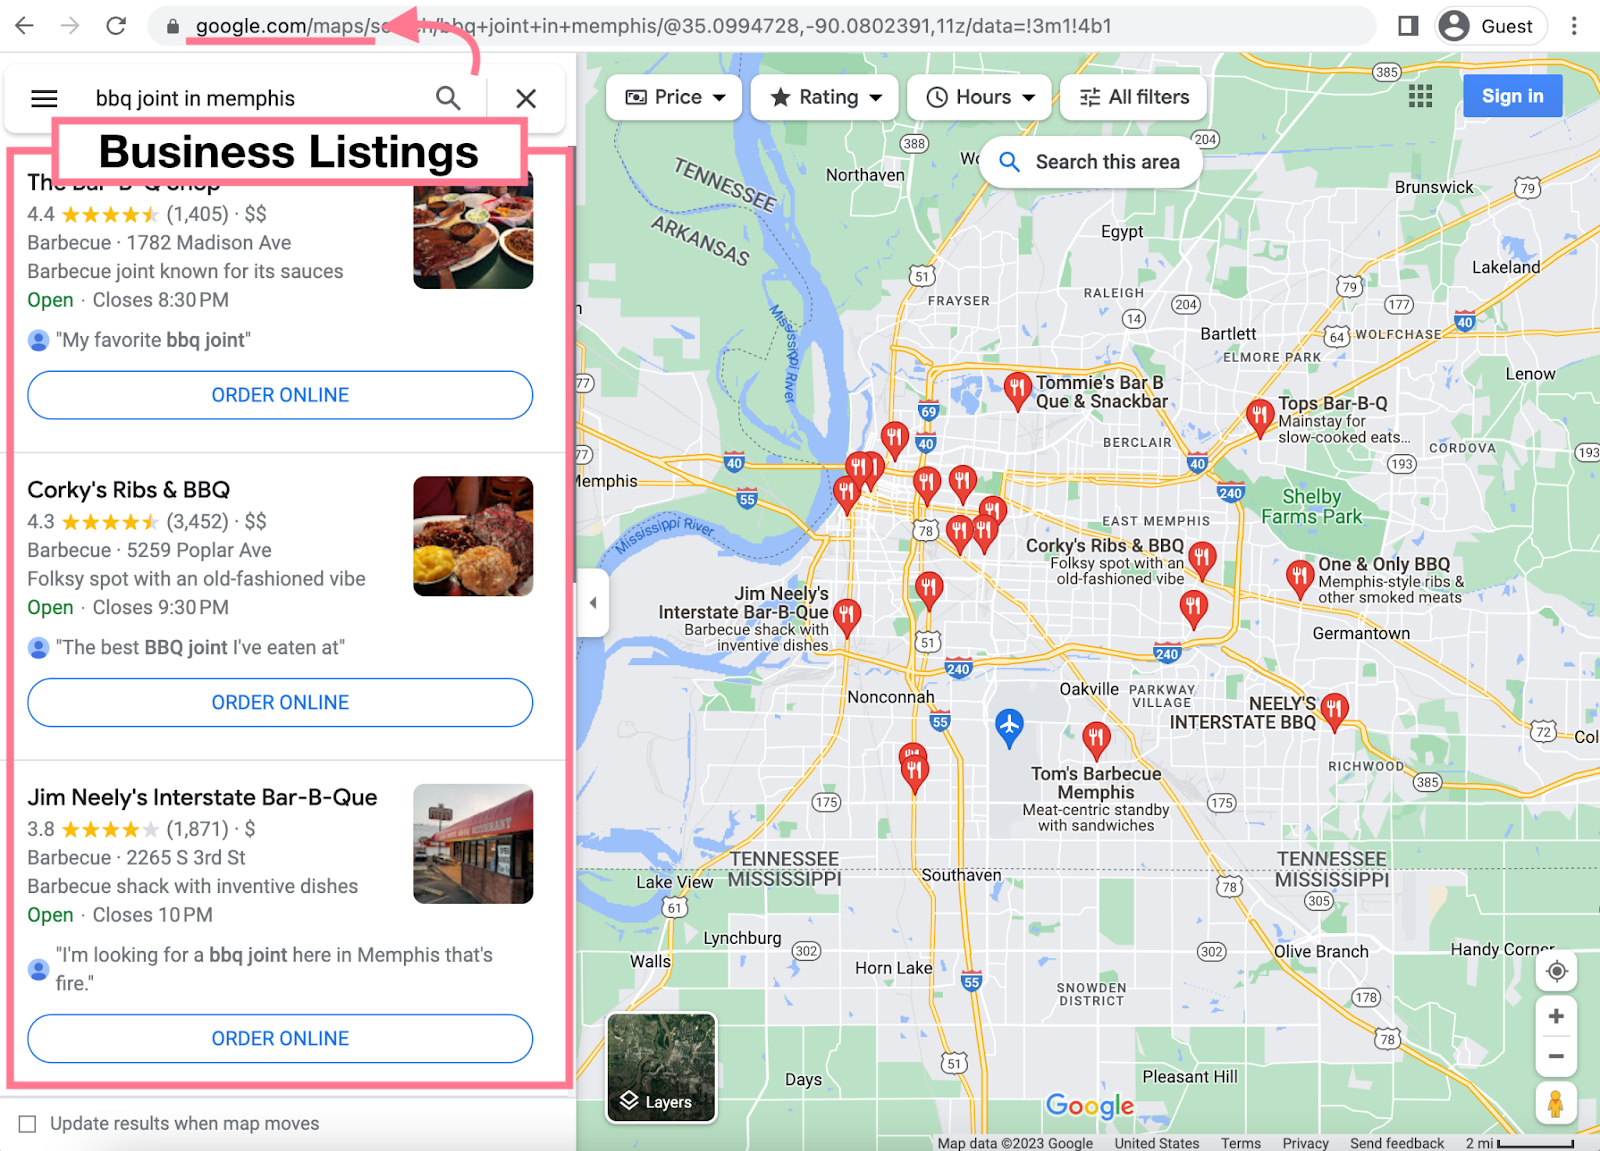 Business listings in Google